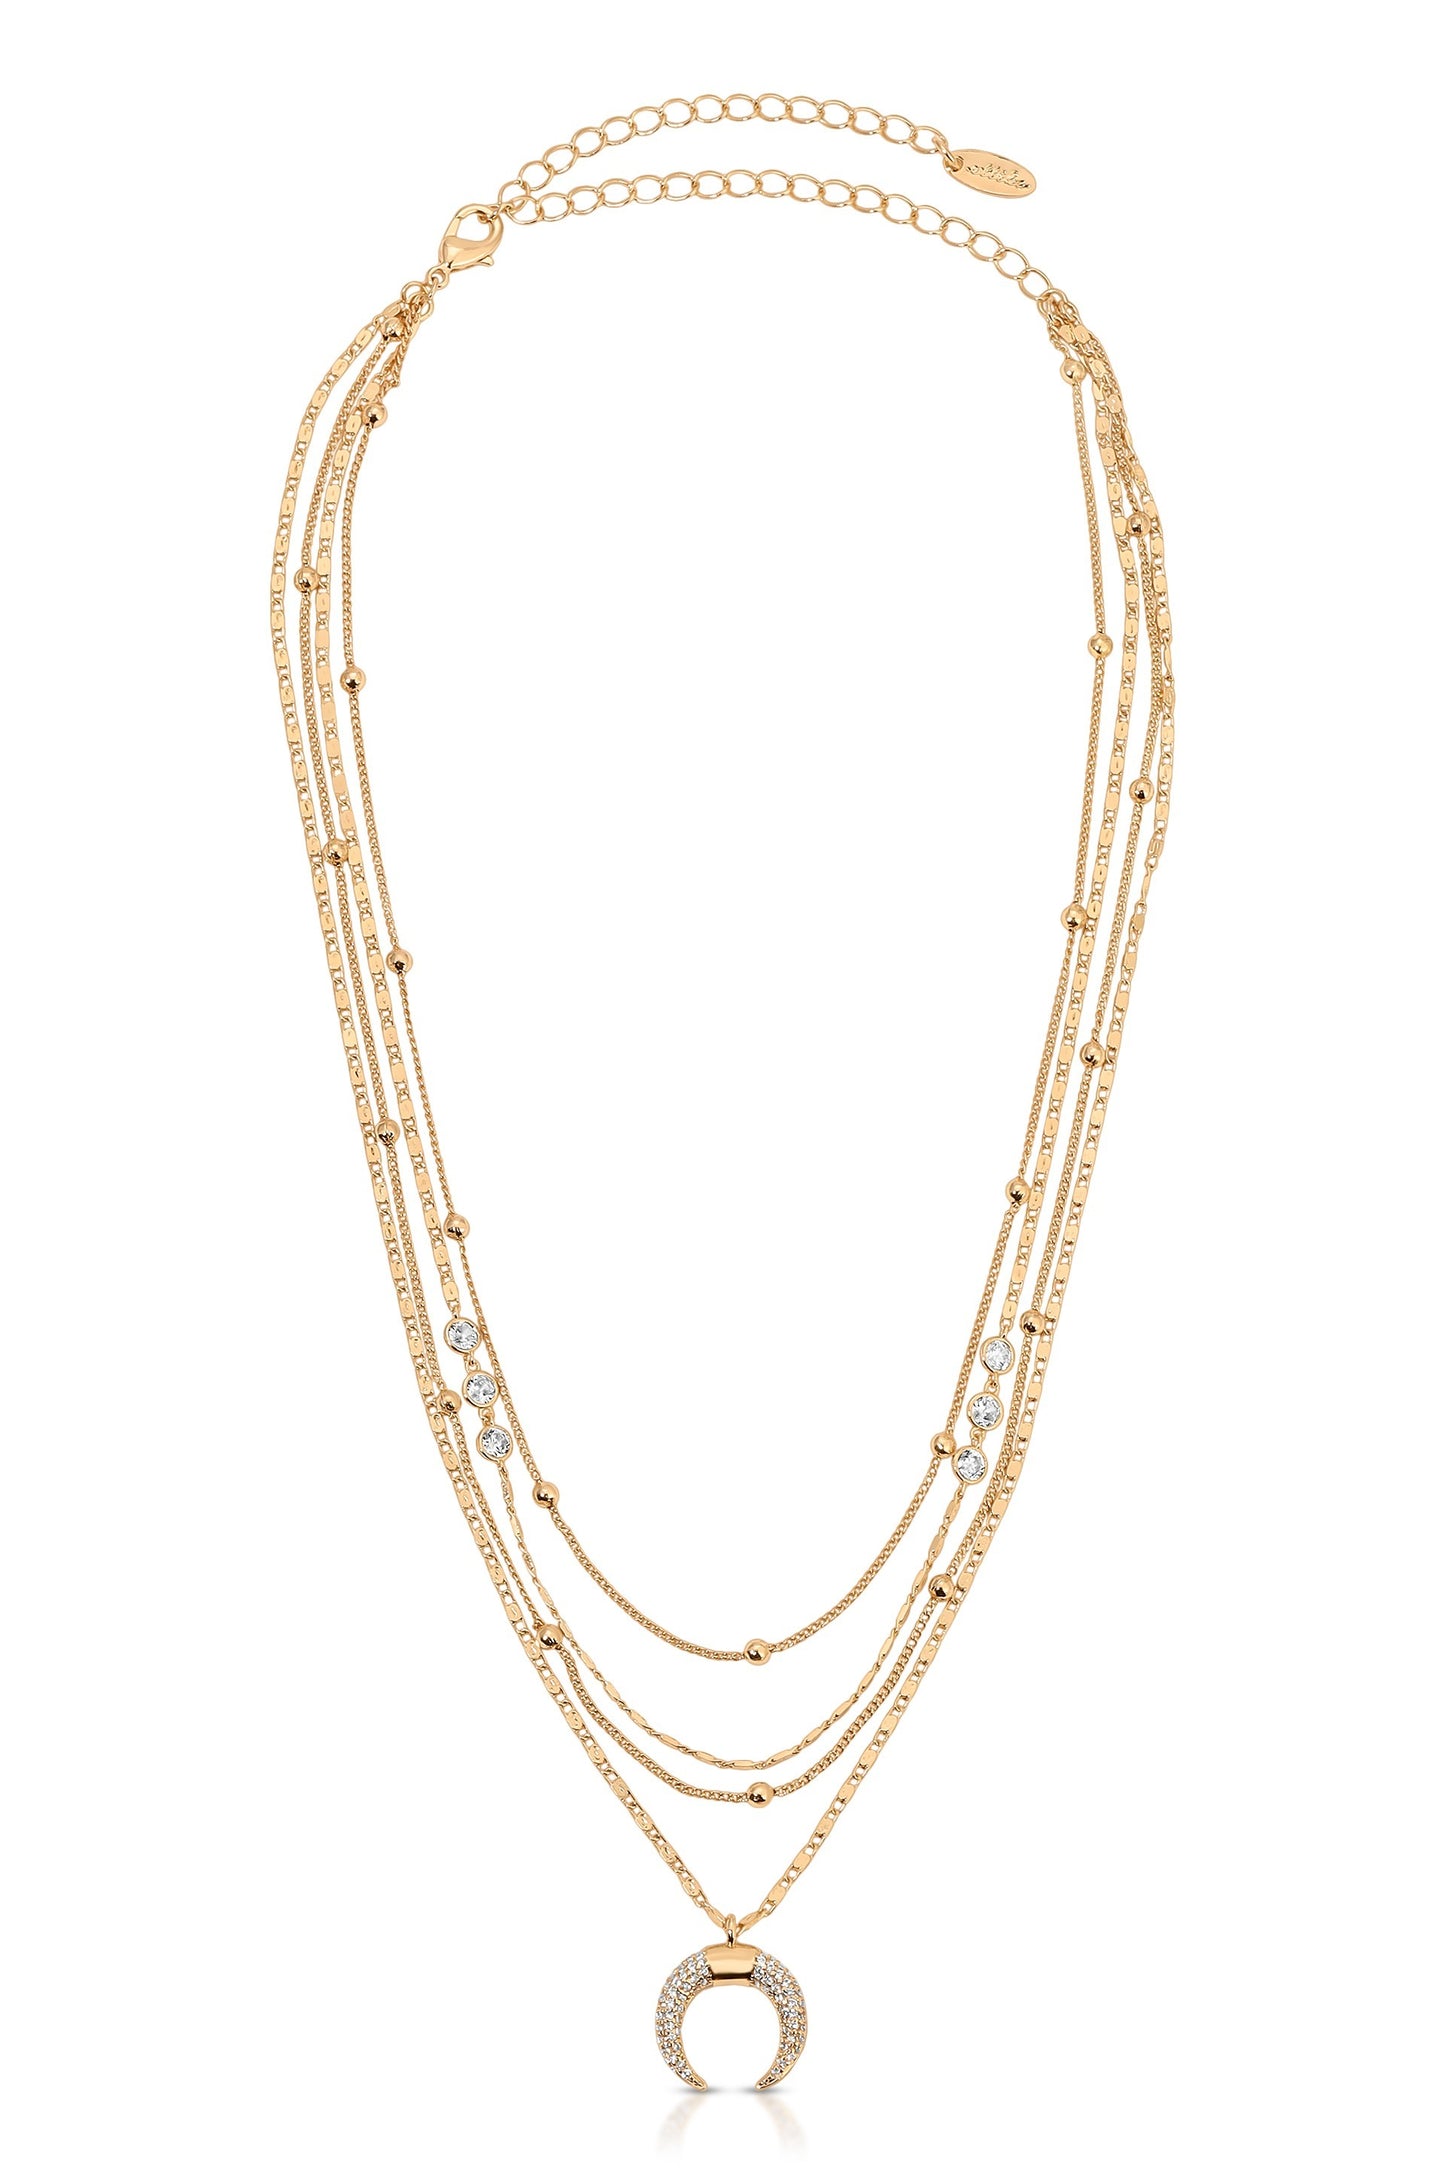 Layered Gold Chain & Crescent Horn Necklace full